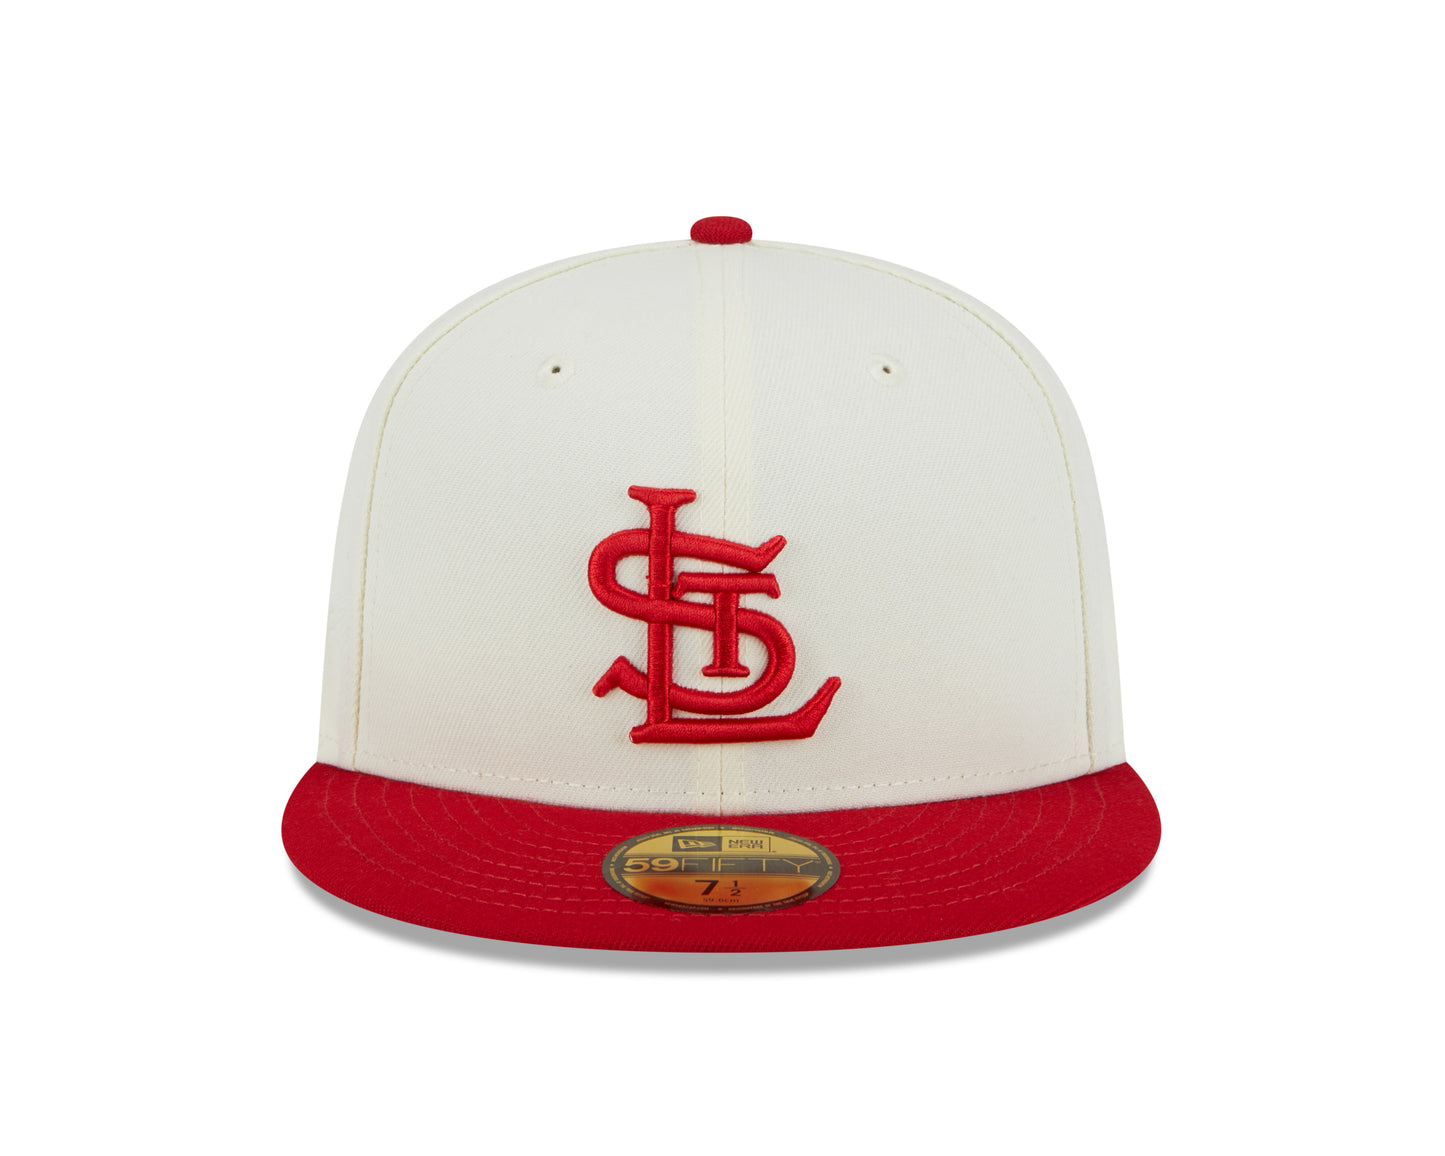 St. Louis Cardinals 2009 All Star Game Cream/Red New Era Retro 59FIFTY Fitted Hat